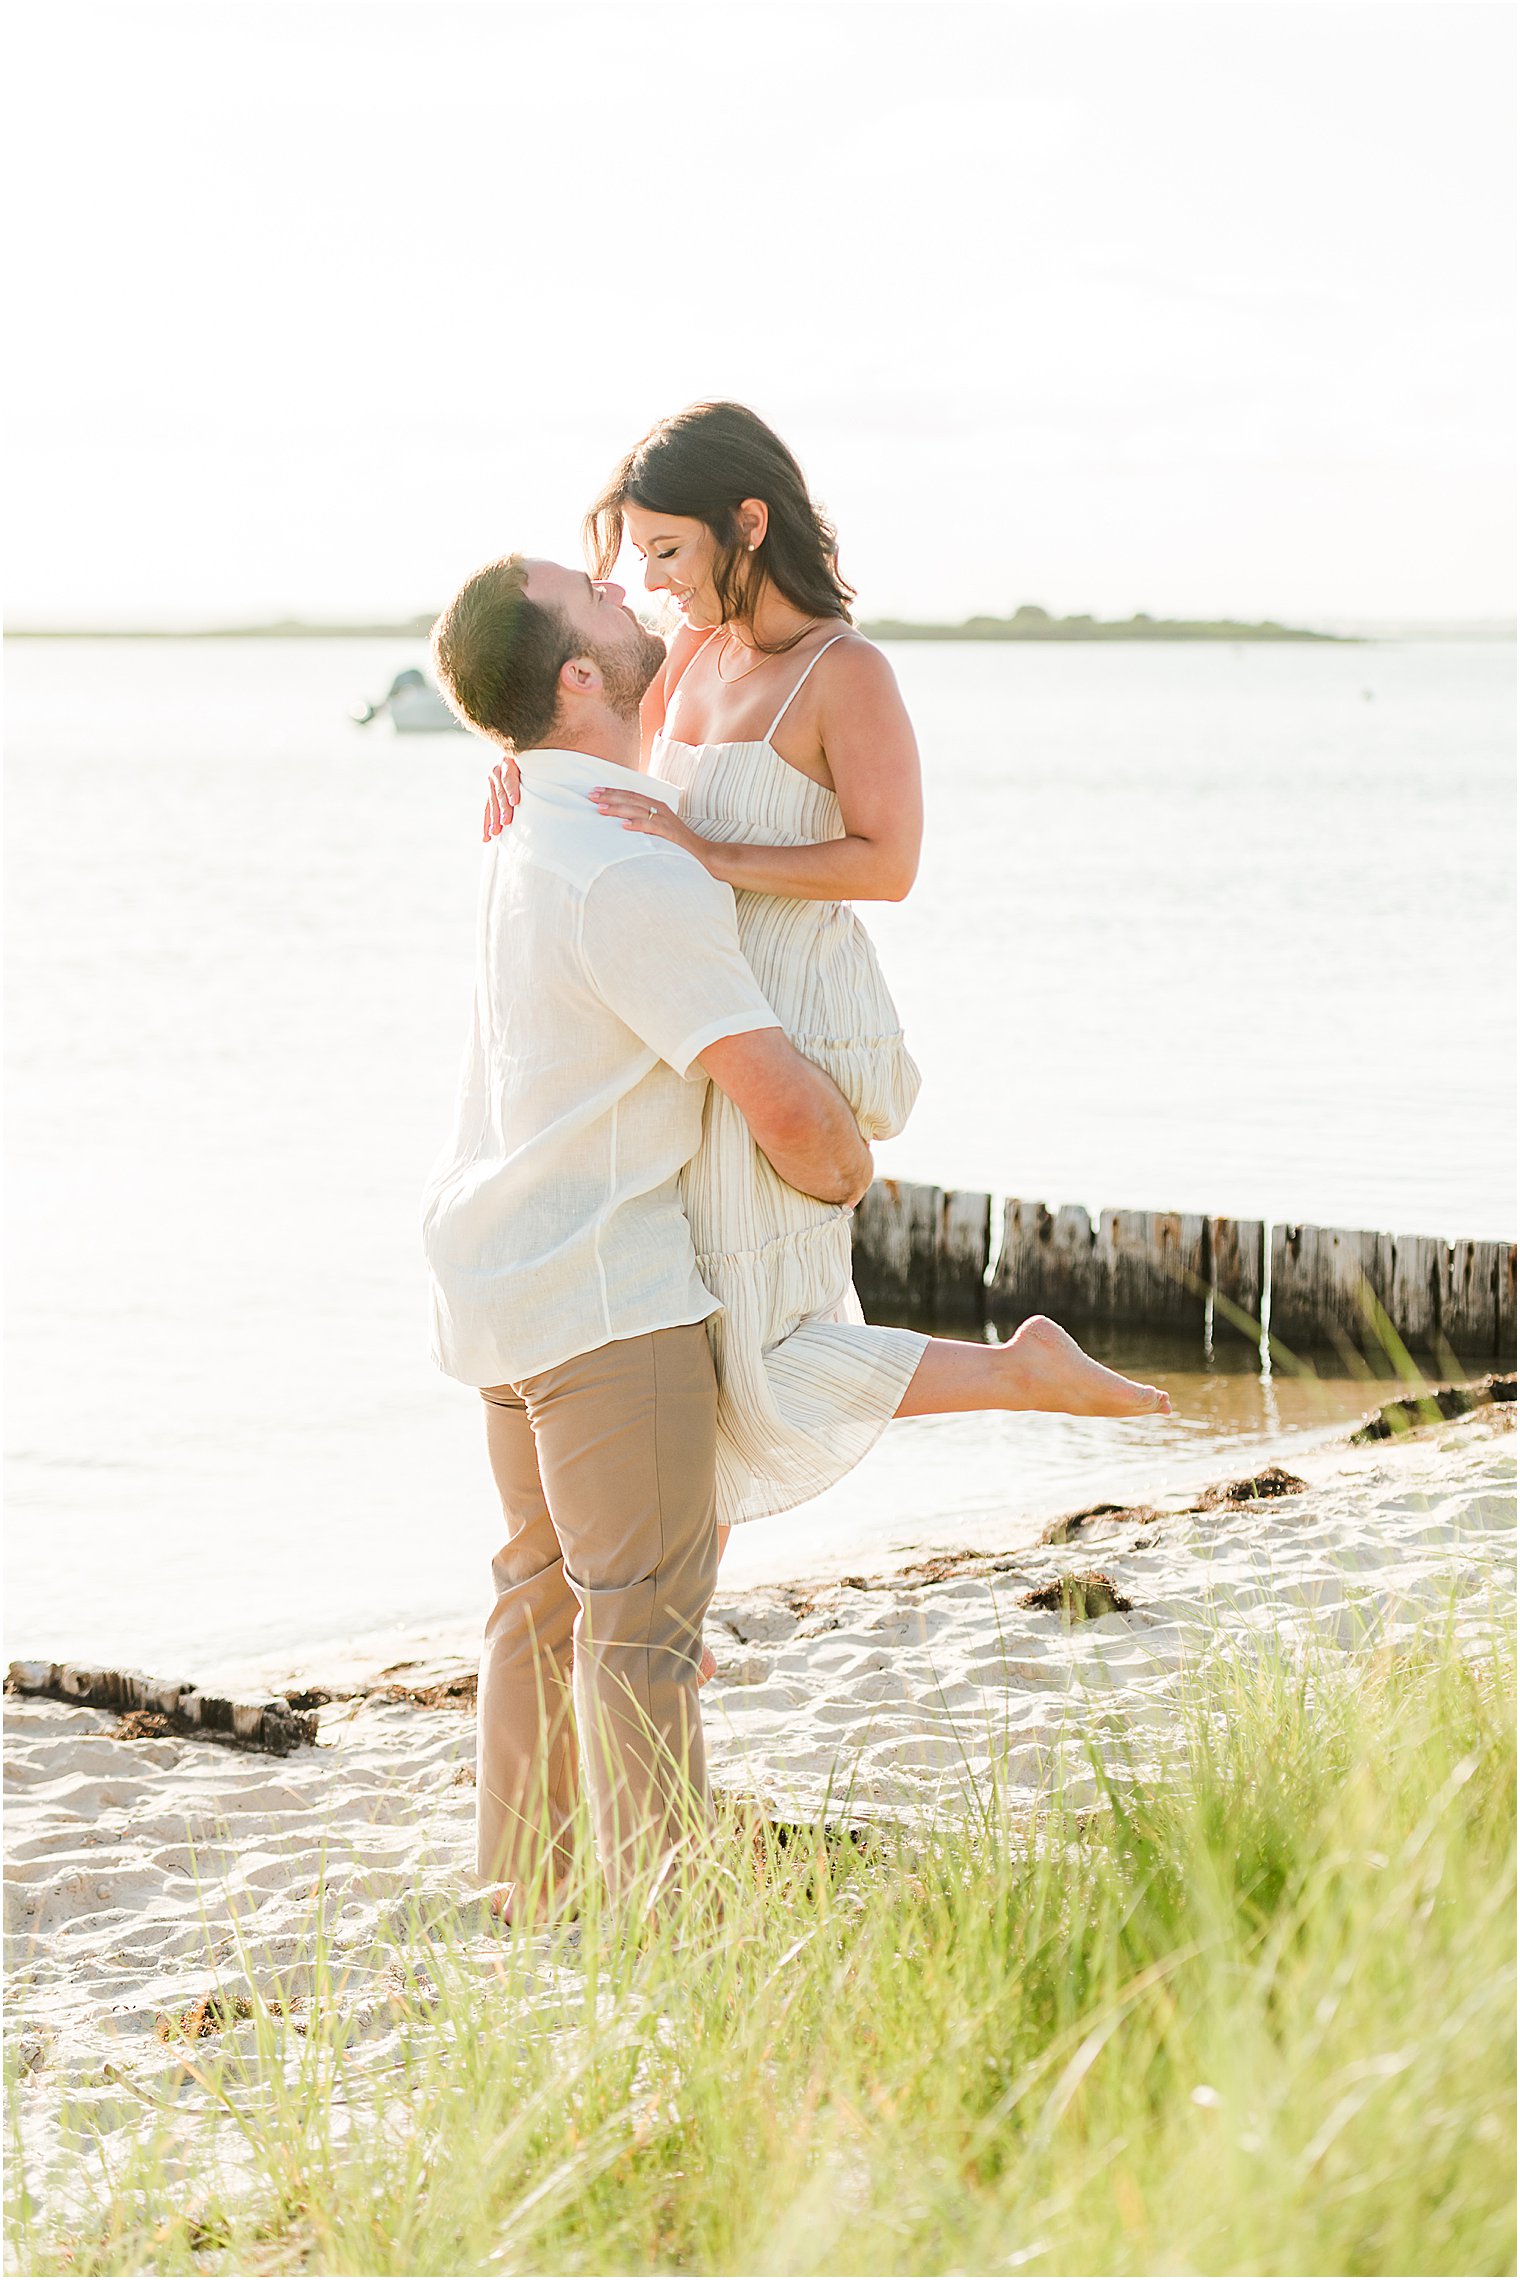 groom lifts bride up on beach during engagement session